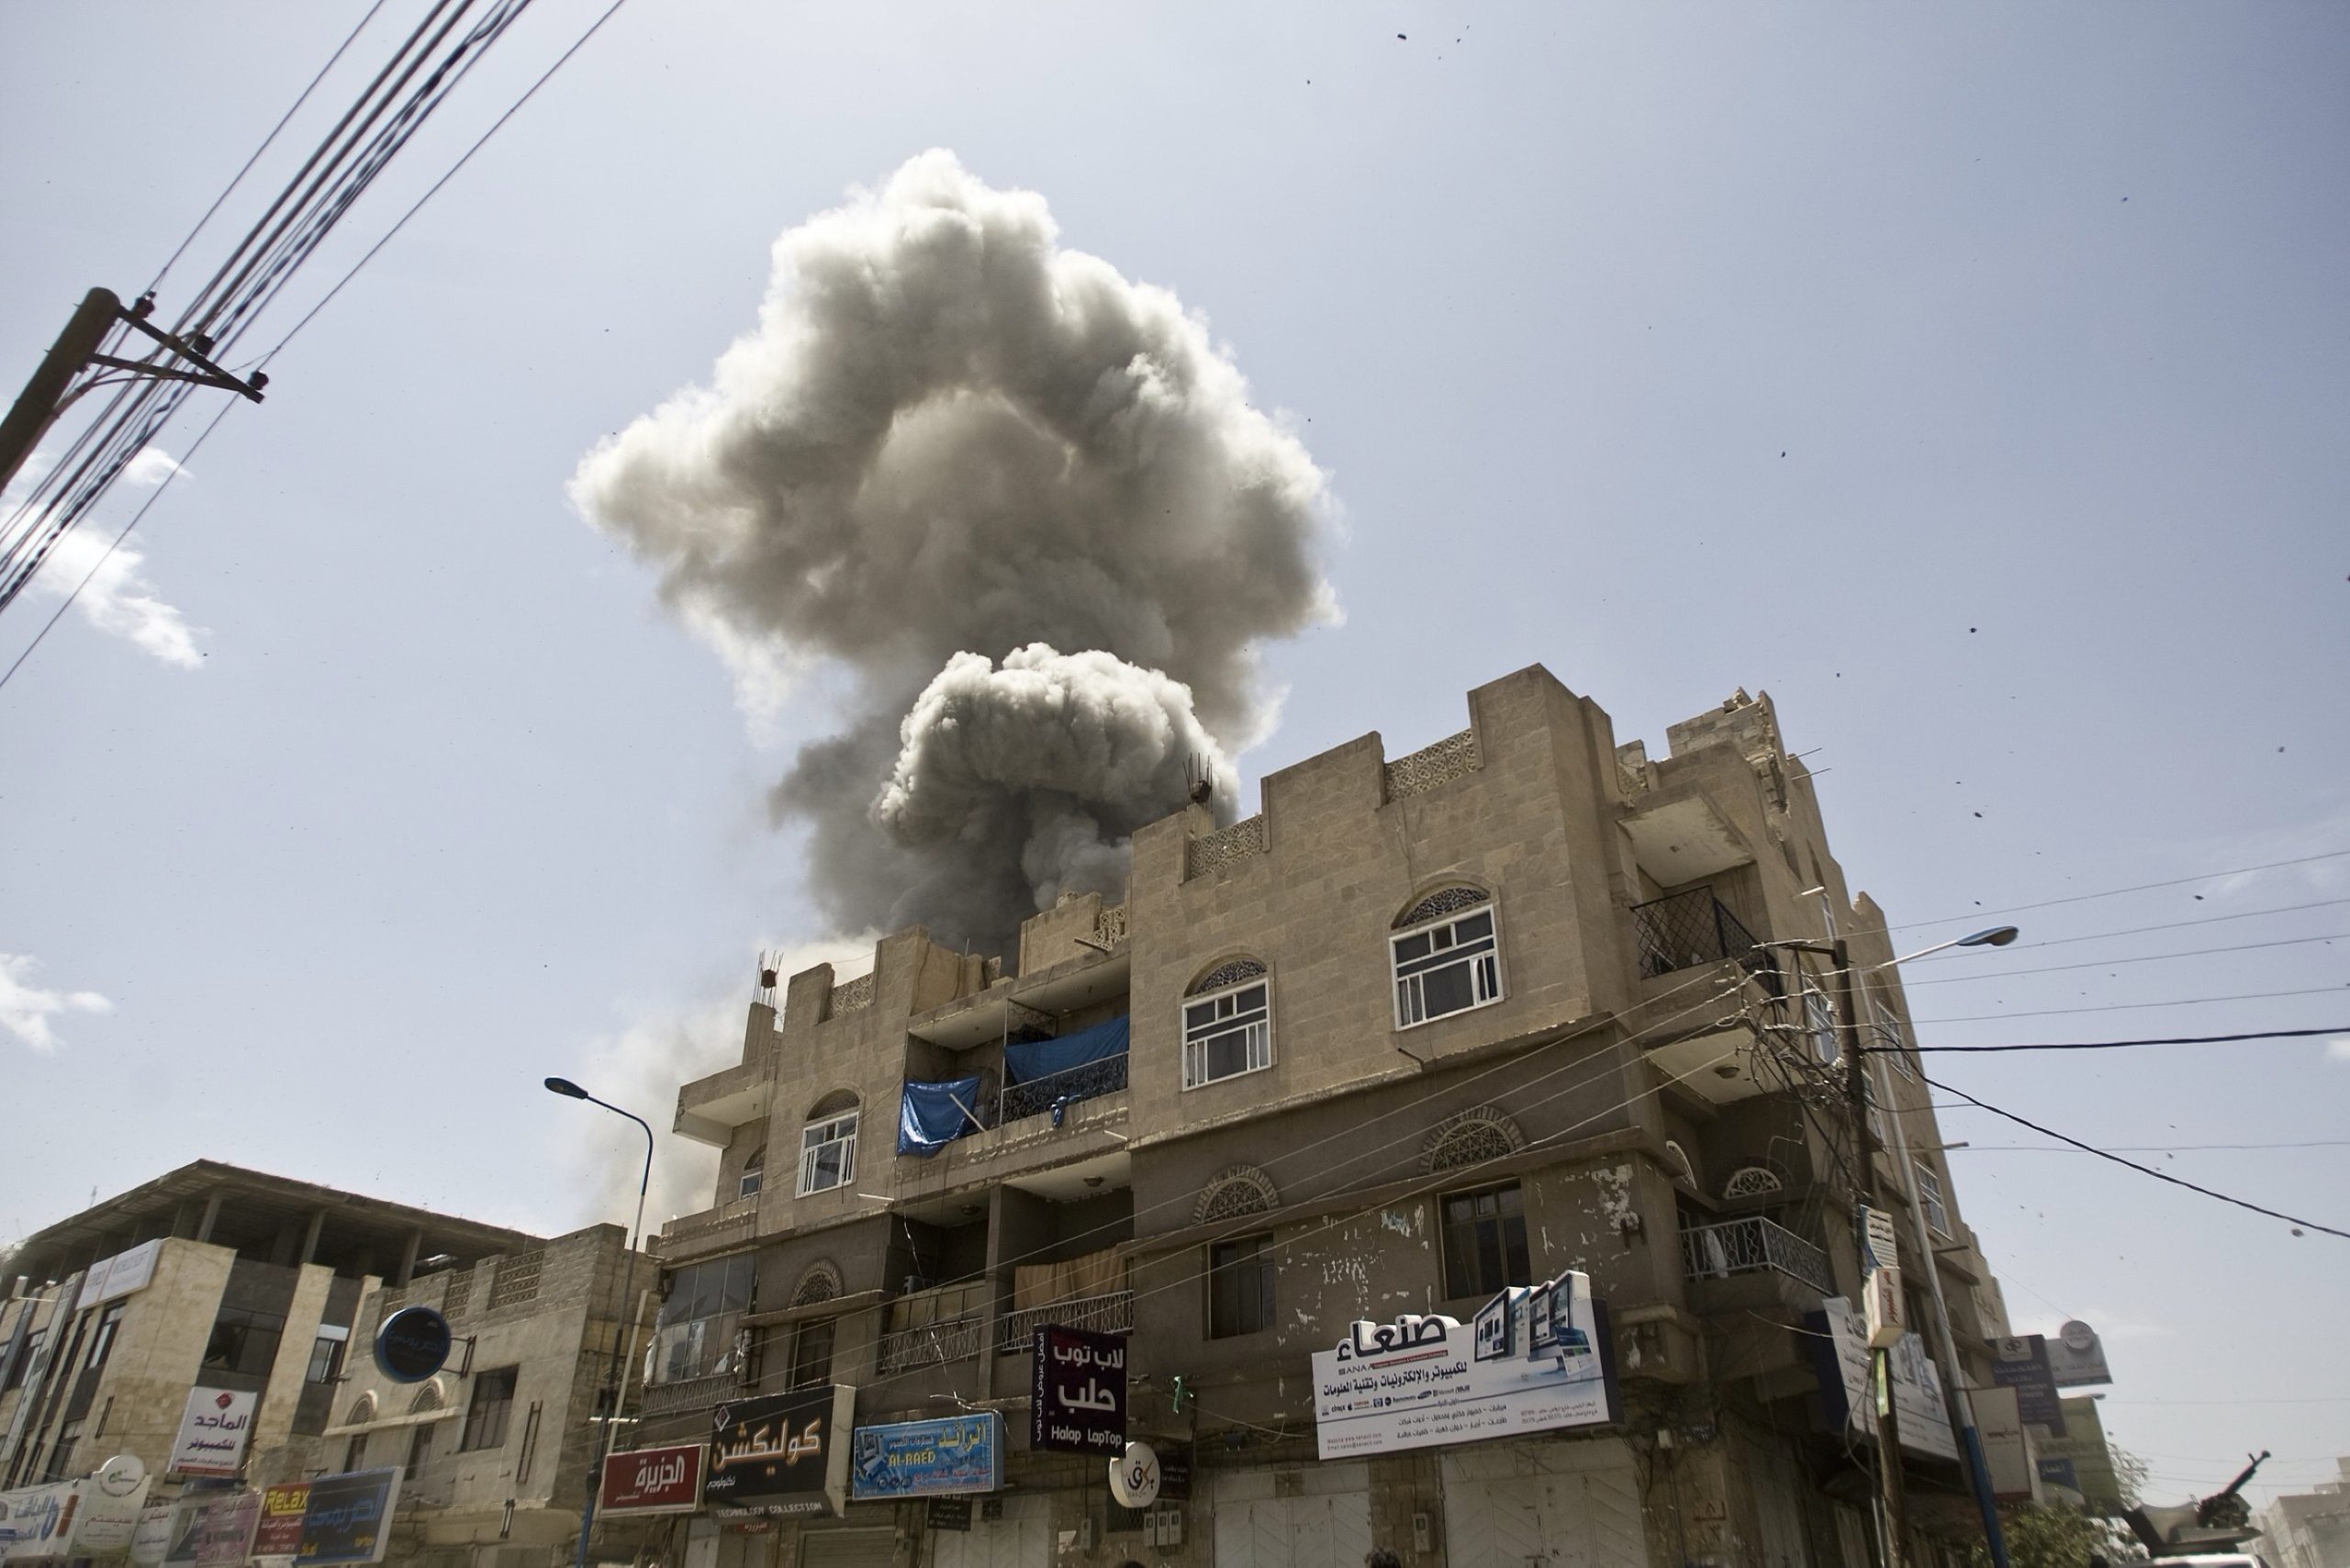 Europe’s involvement in war crimes in Yemen: stop arms exports and end impunity